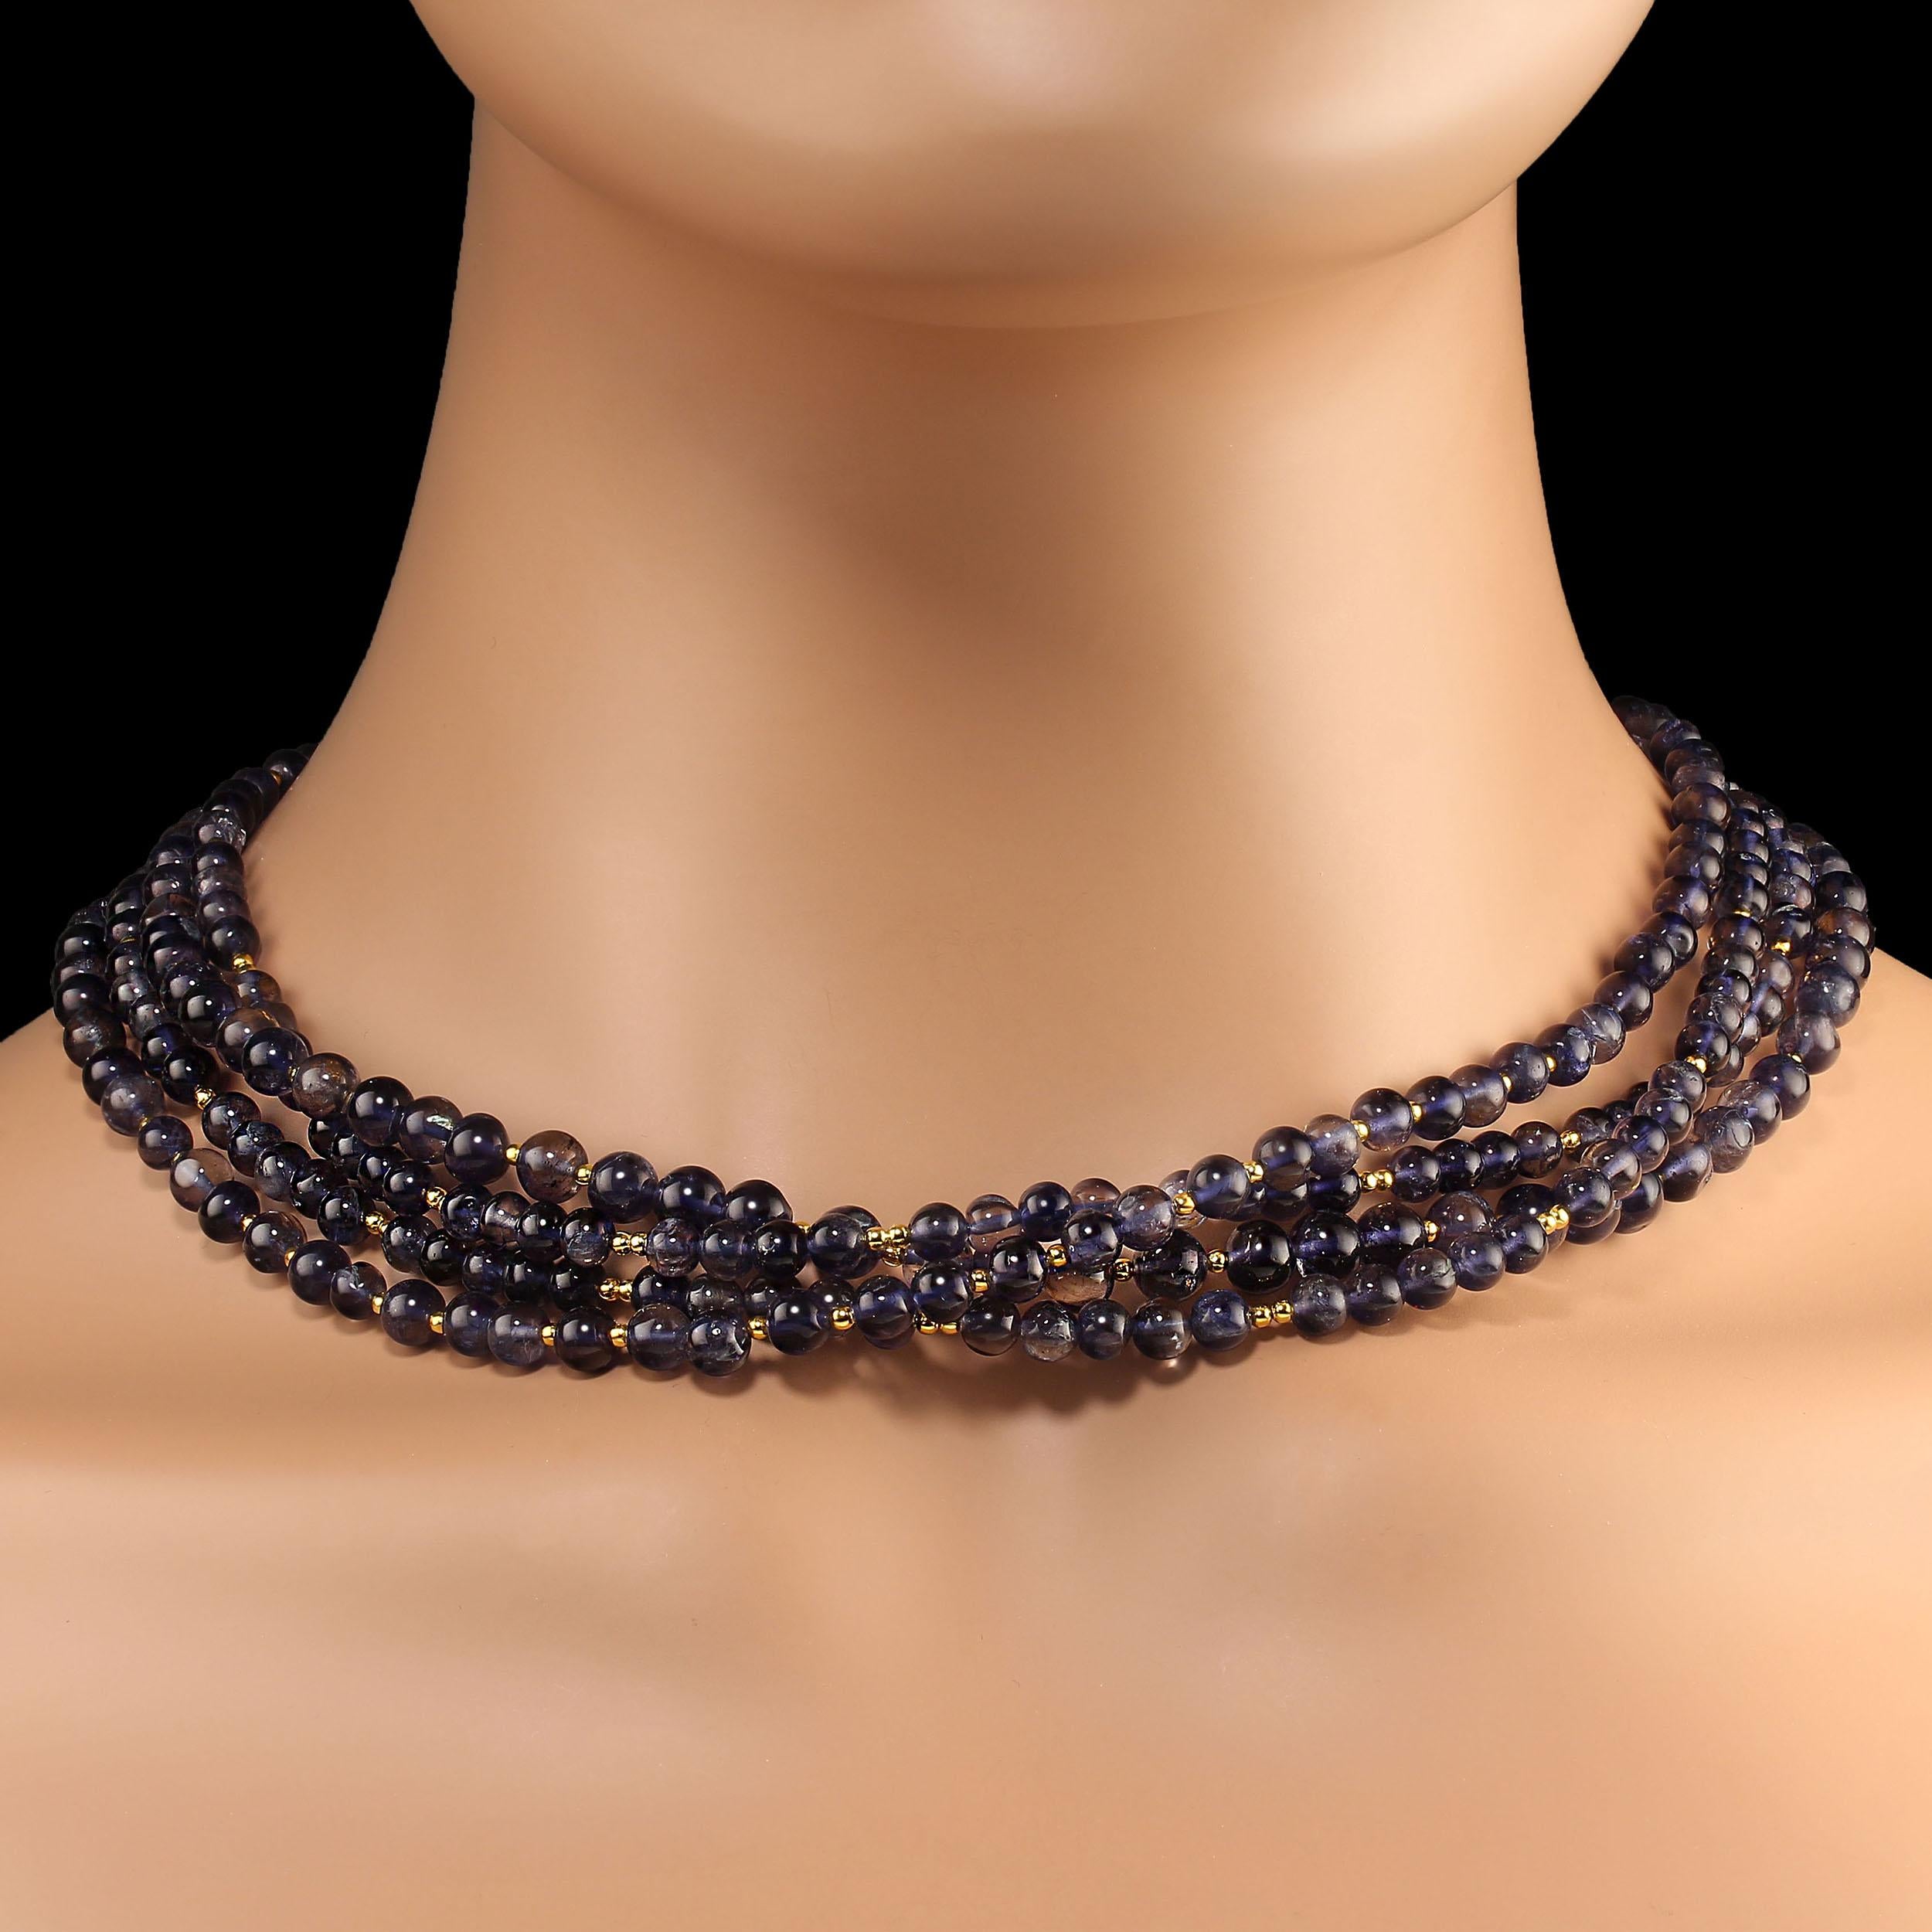 18-Inch necklace of blue iolite 5-6 mm highly polished smooth beads.  Iolite is a rare gemstone being trichroic. Depending on the angle from which it is viewed it can appear blue, gray, or straw (yellowish).   Each of these four strands has slightly